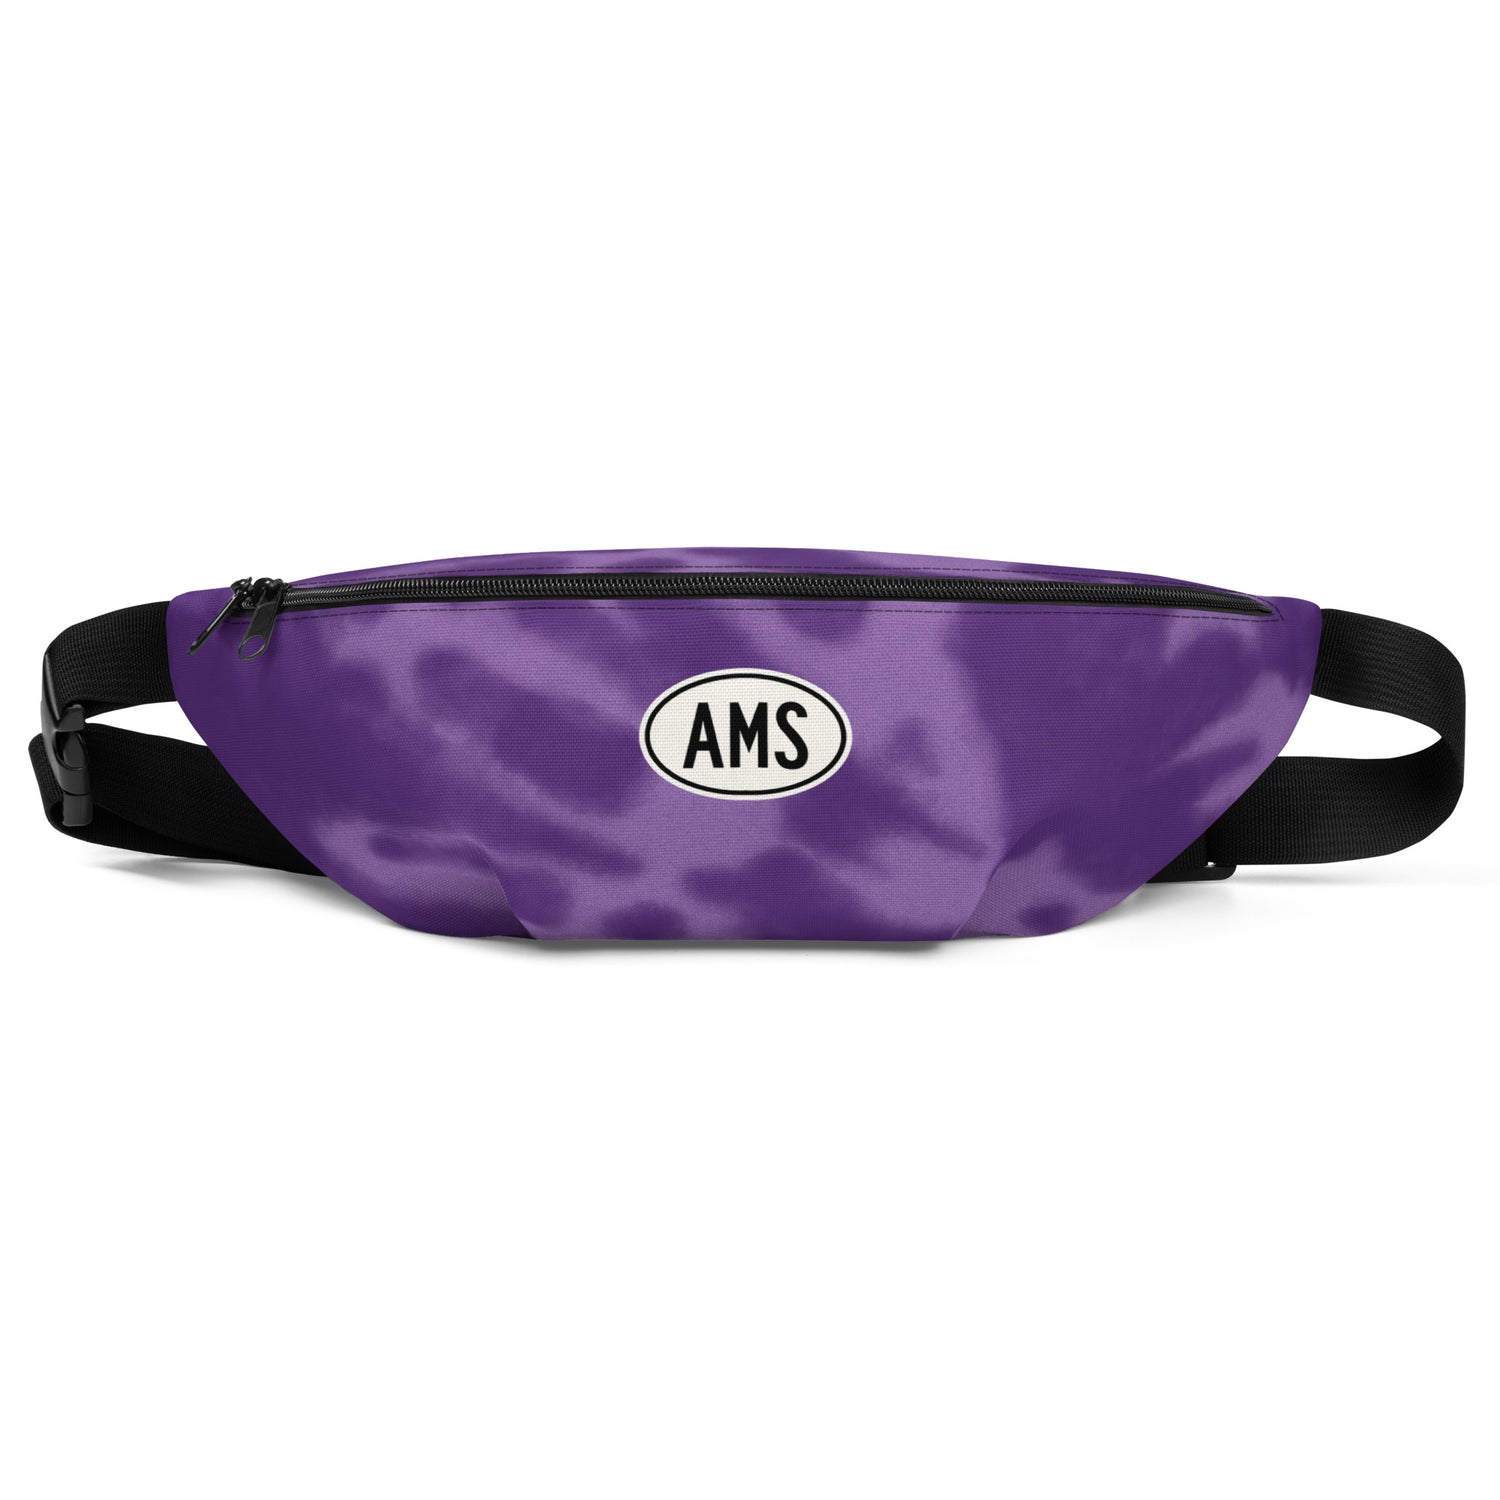 Amsterdam Netherlands Backpacks, Fanny Packs and Tote Bags • AMS Airport Code